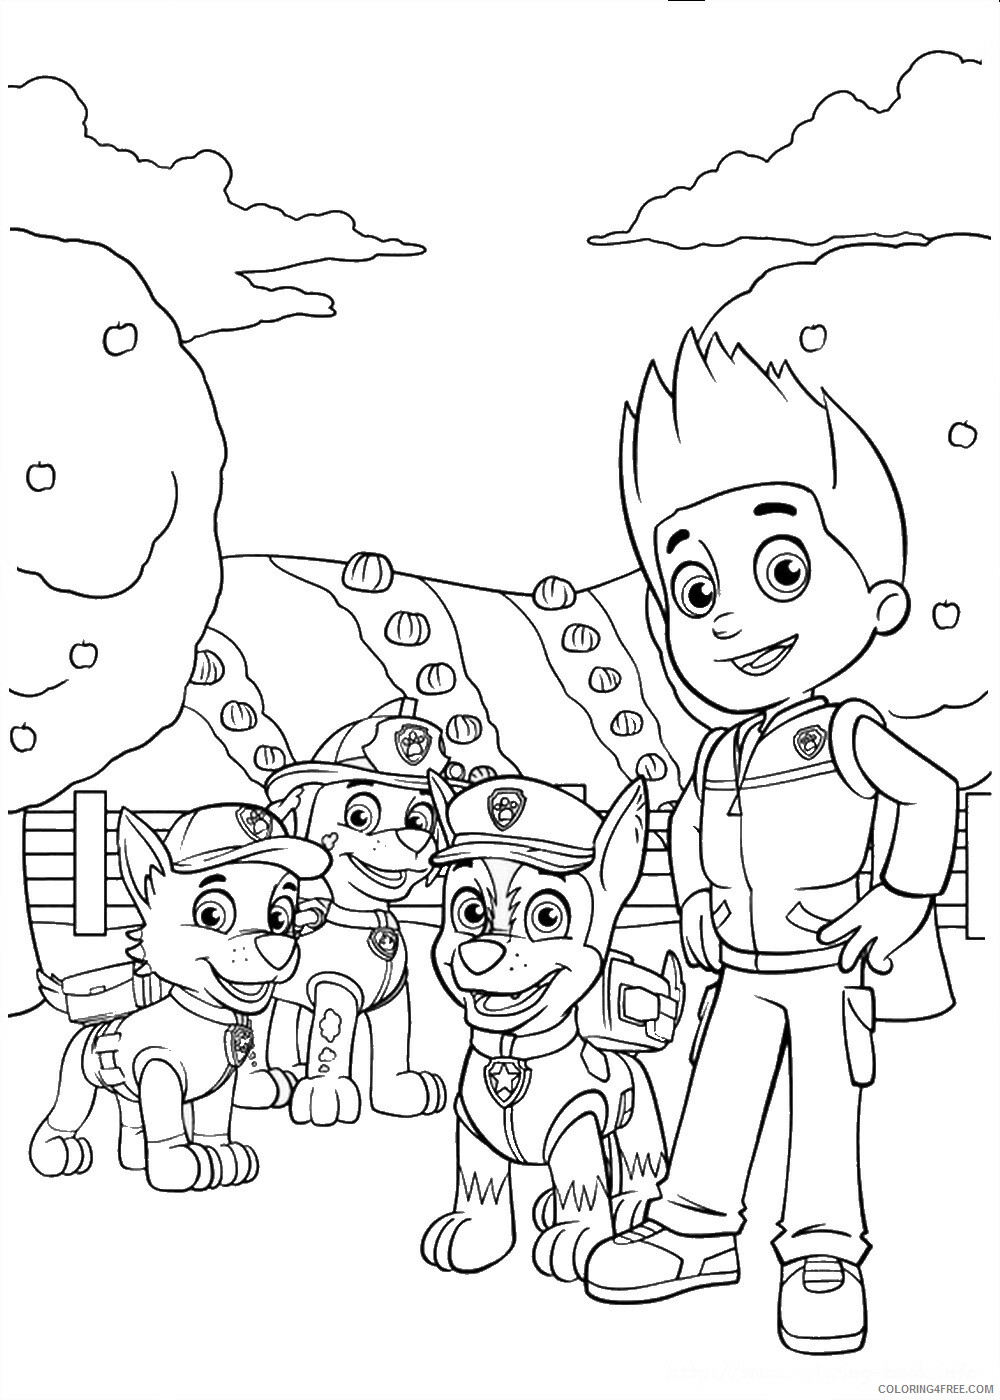 Paw Patrol Coloring Pages TV Film Printable 2020 05932 Coloring4free